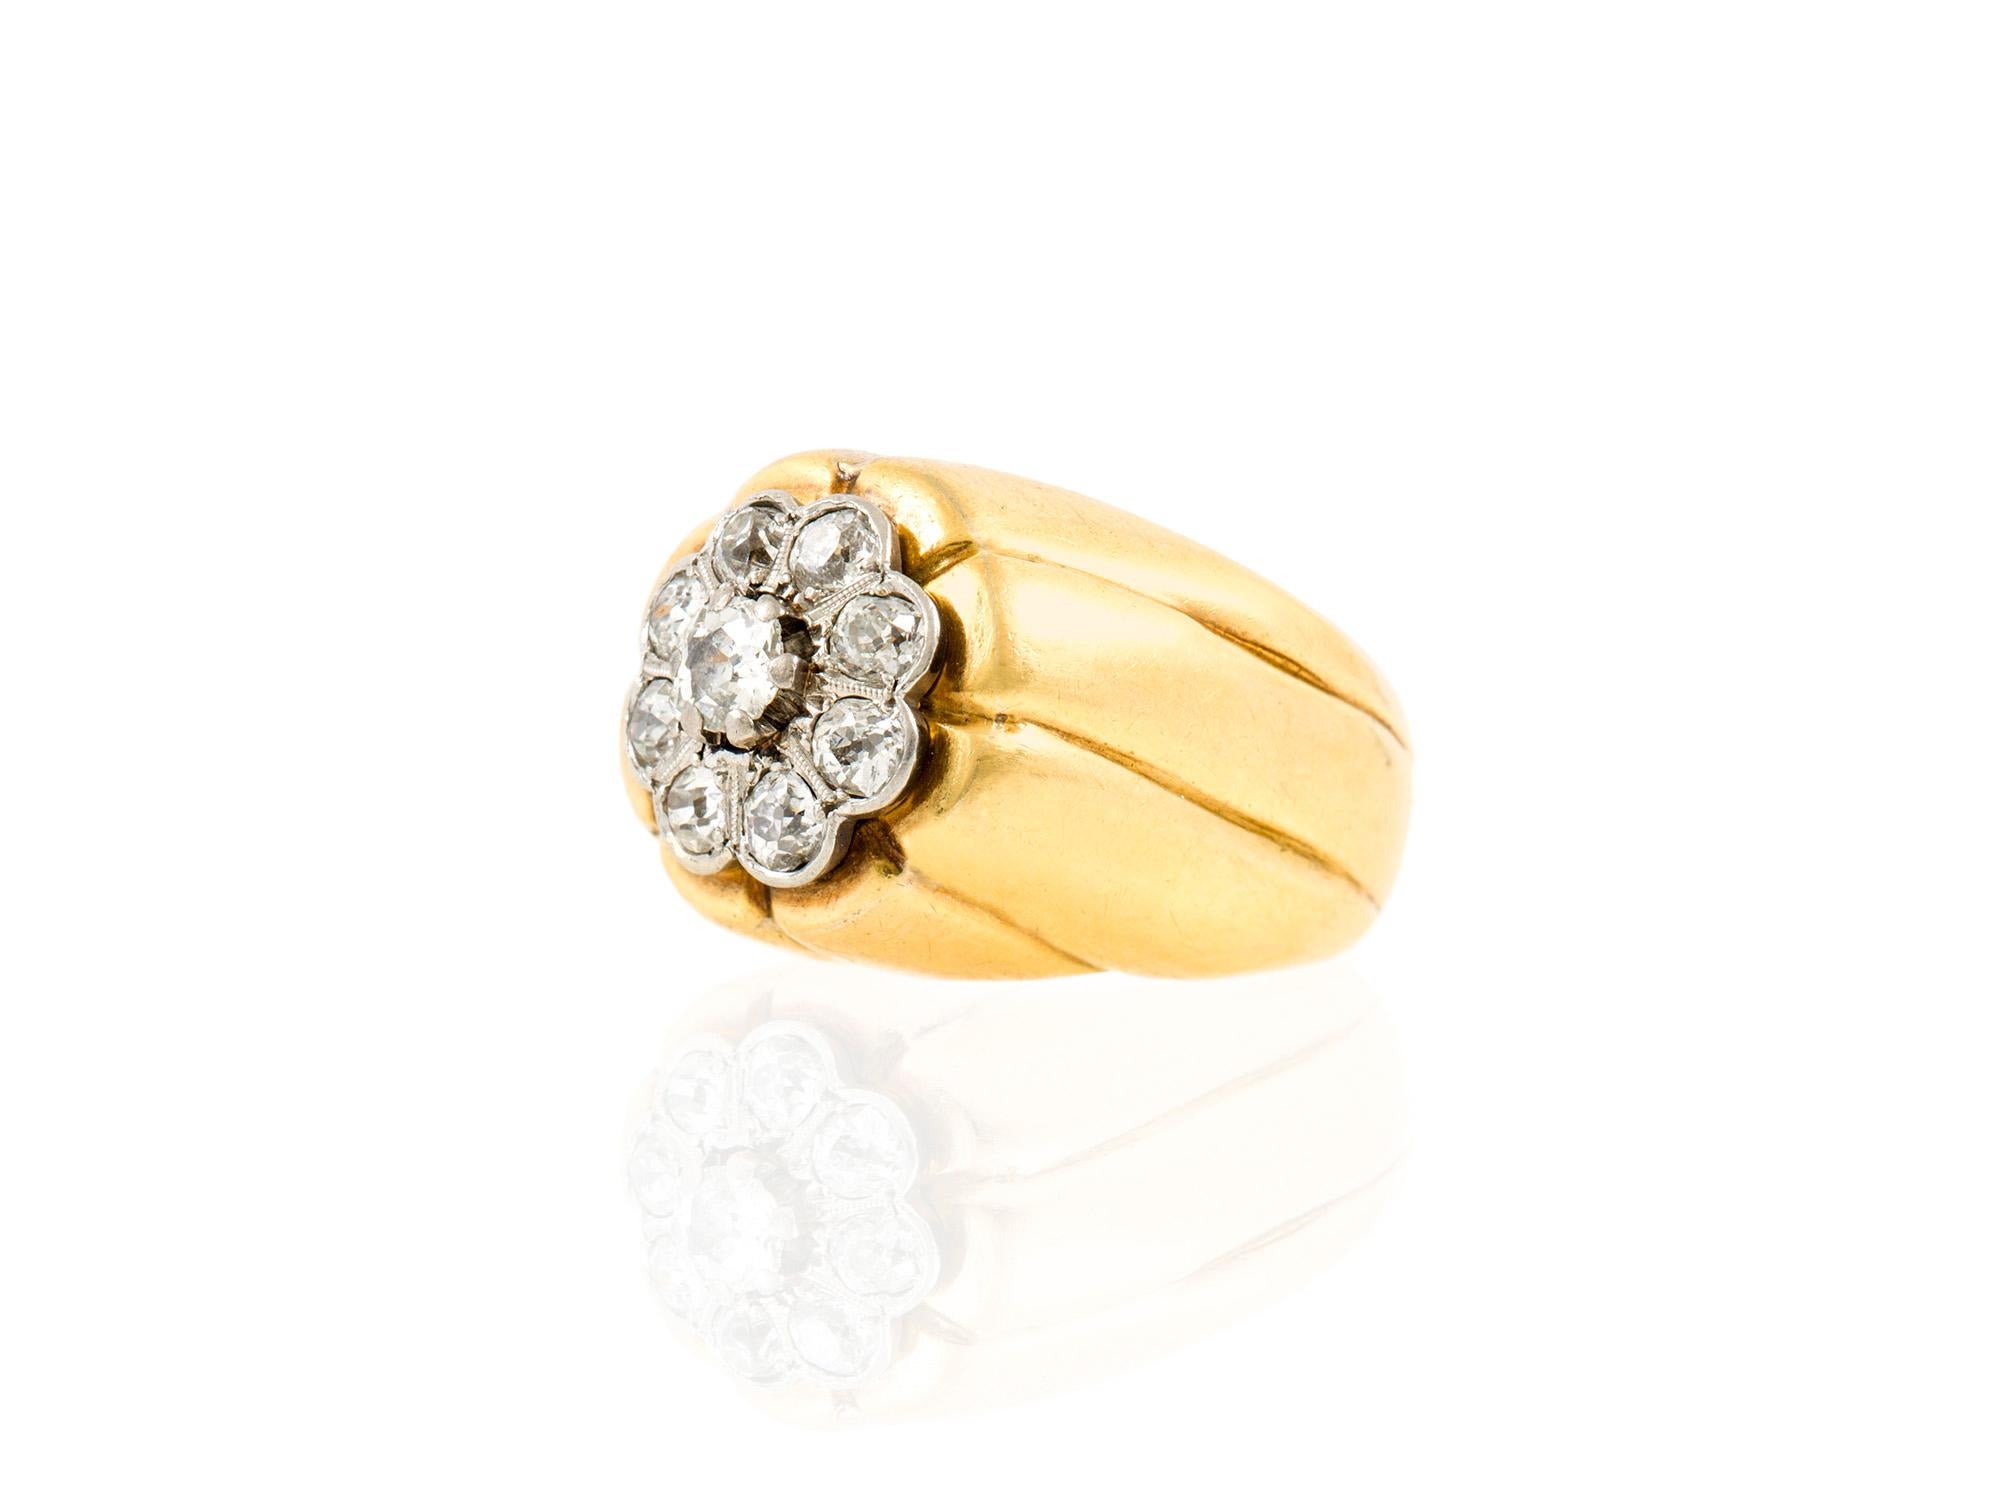 The ring is fineky crafted in 17k yellow gold with platinum setting on the top of the ring.
With diamonds weighing total of 1.00 carat.
